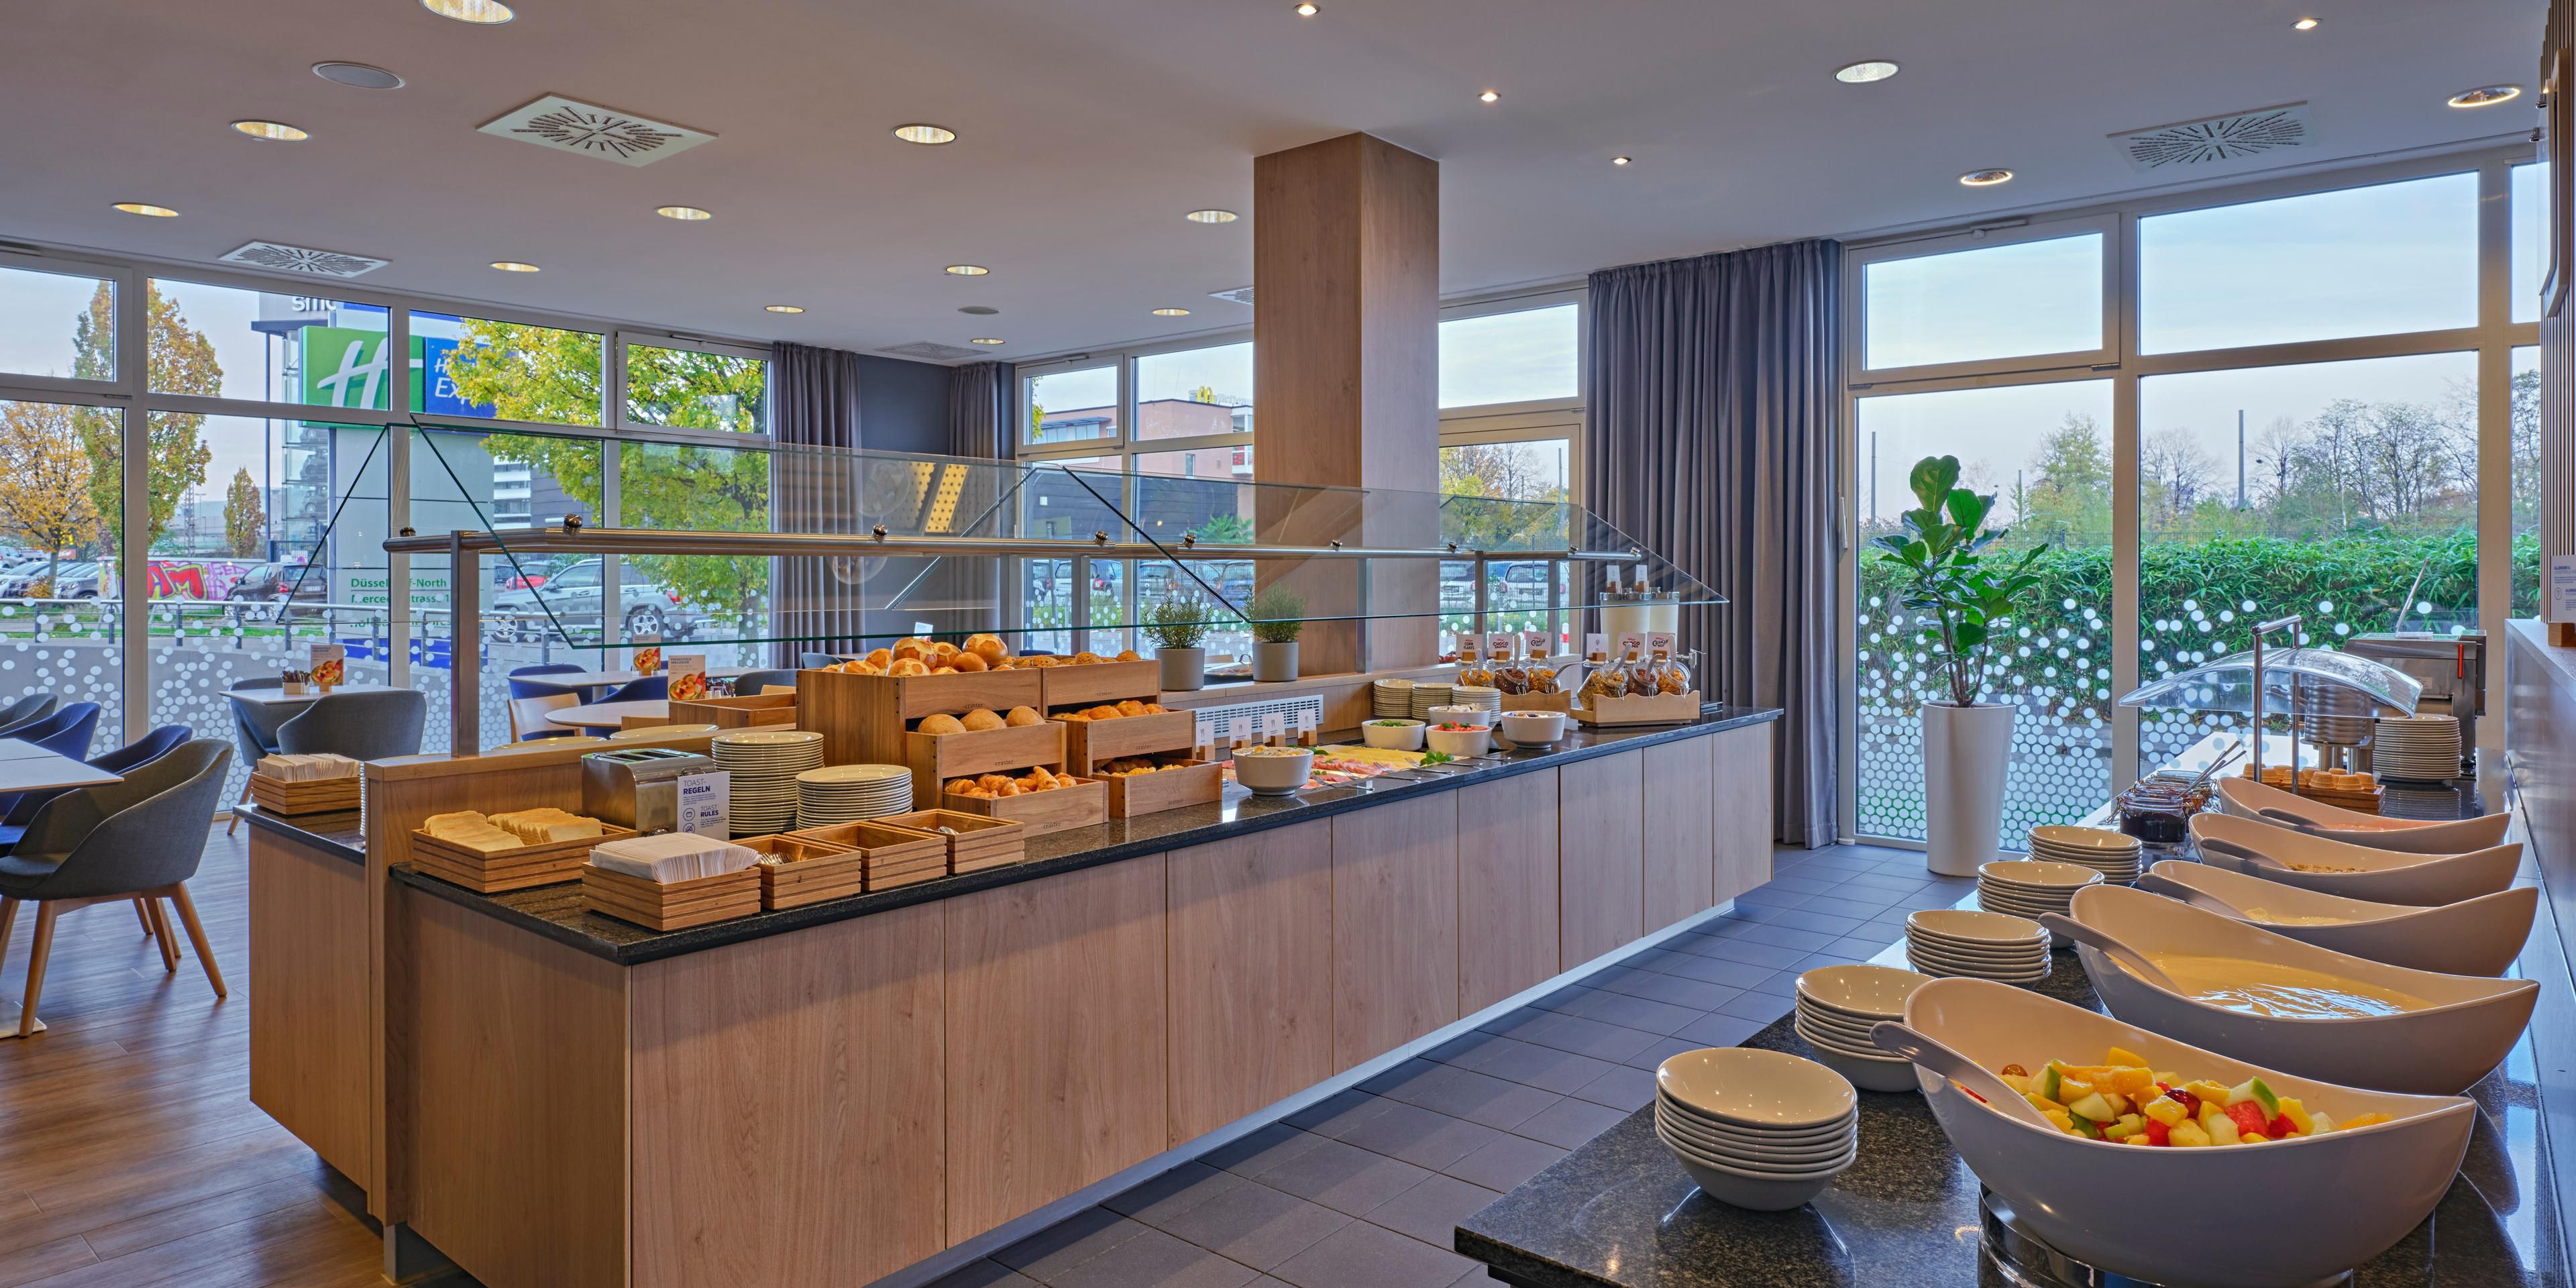 Head to the Great Room each morning for an included Express Start™ Breakfast. This continental buffet offers fluffy croissants and pastries, plus local cold cuts, eggs, cheeses, and fresh fruit.